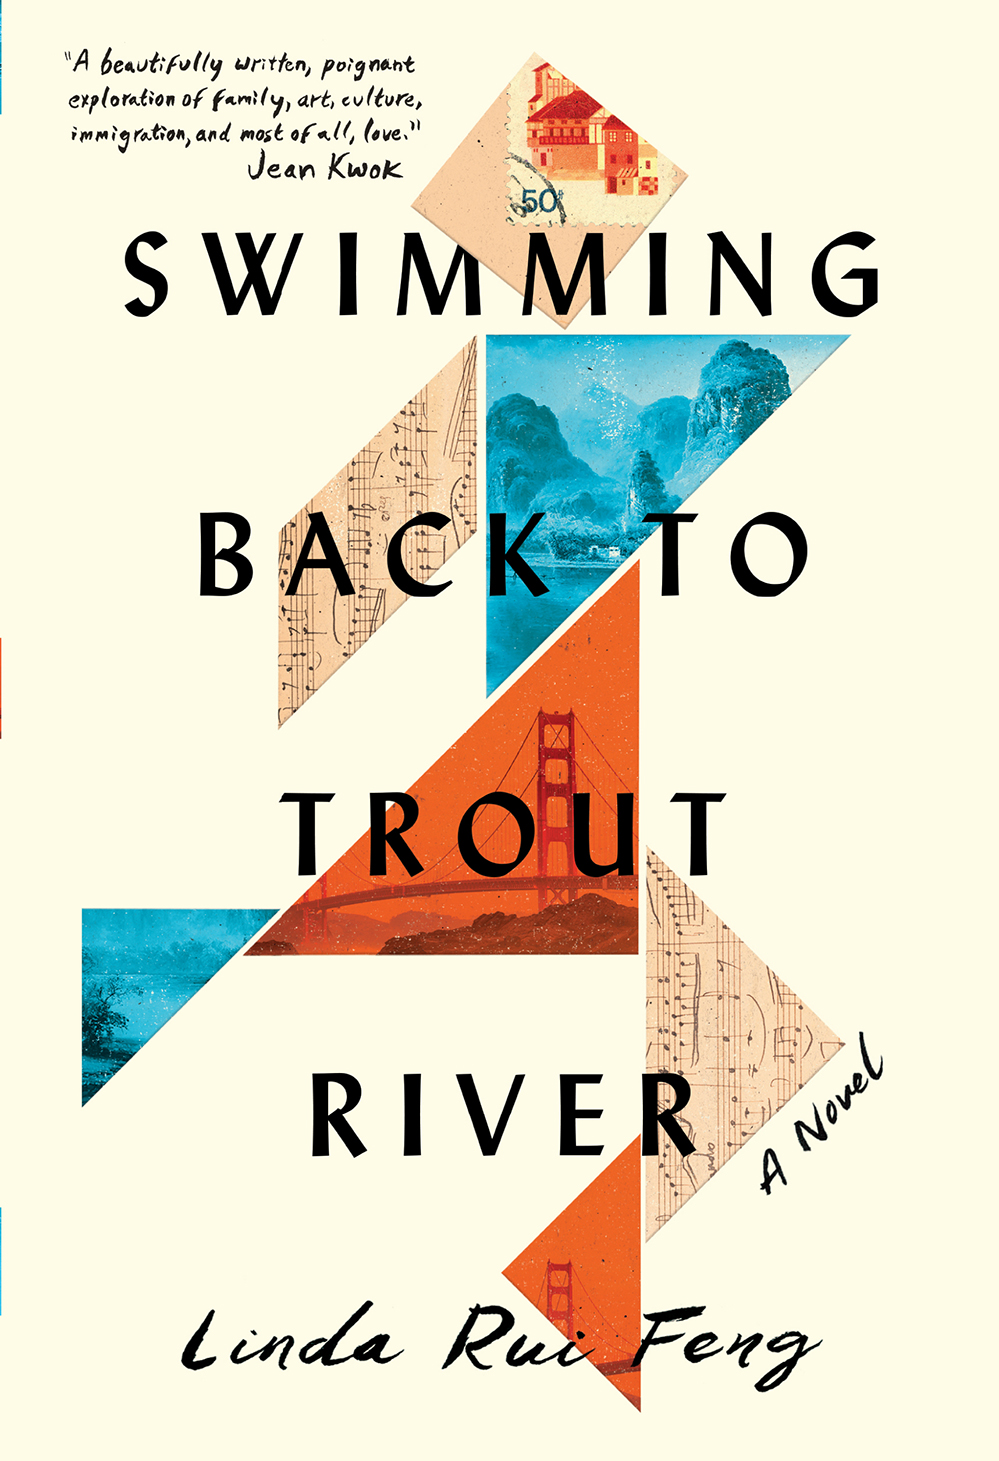 Swimming Back to Trout River by Linda Rui Feng